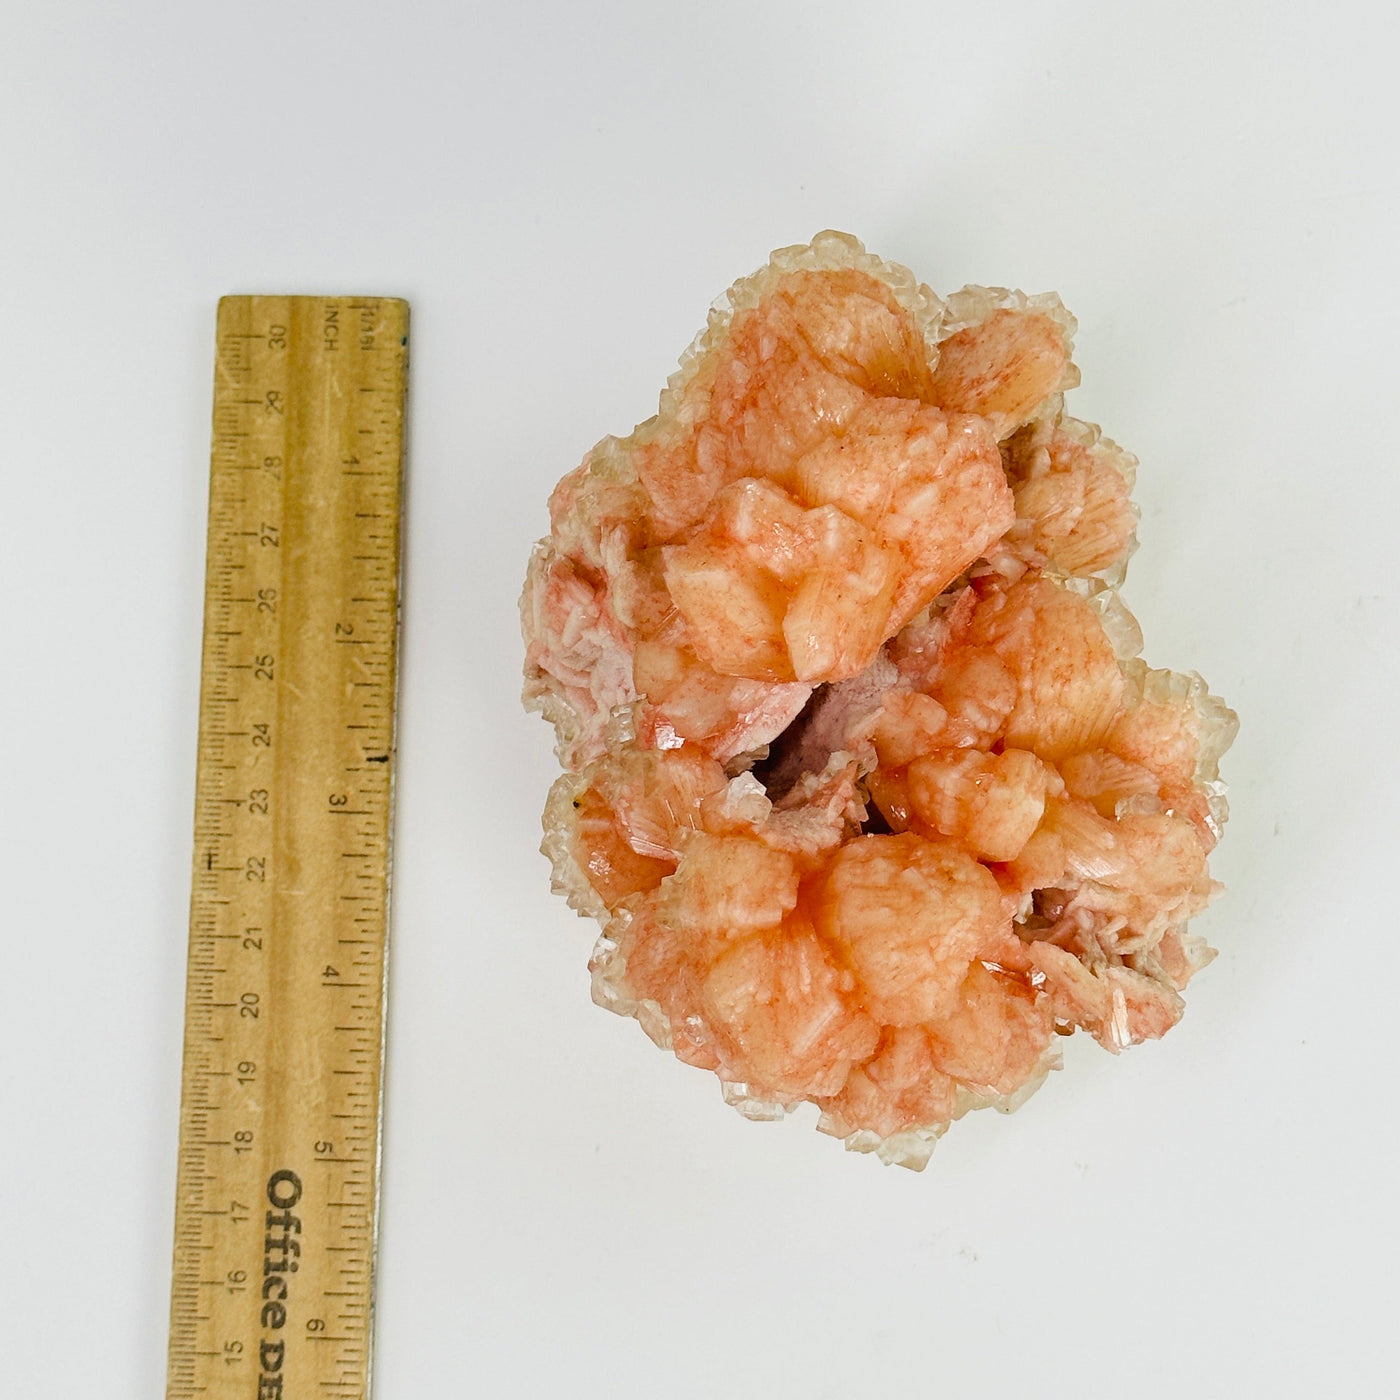 peach apophyllite next to a ruler for size reference